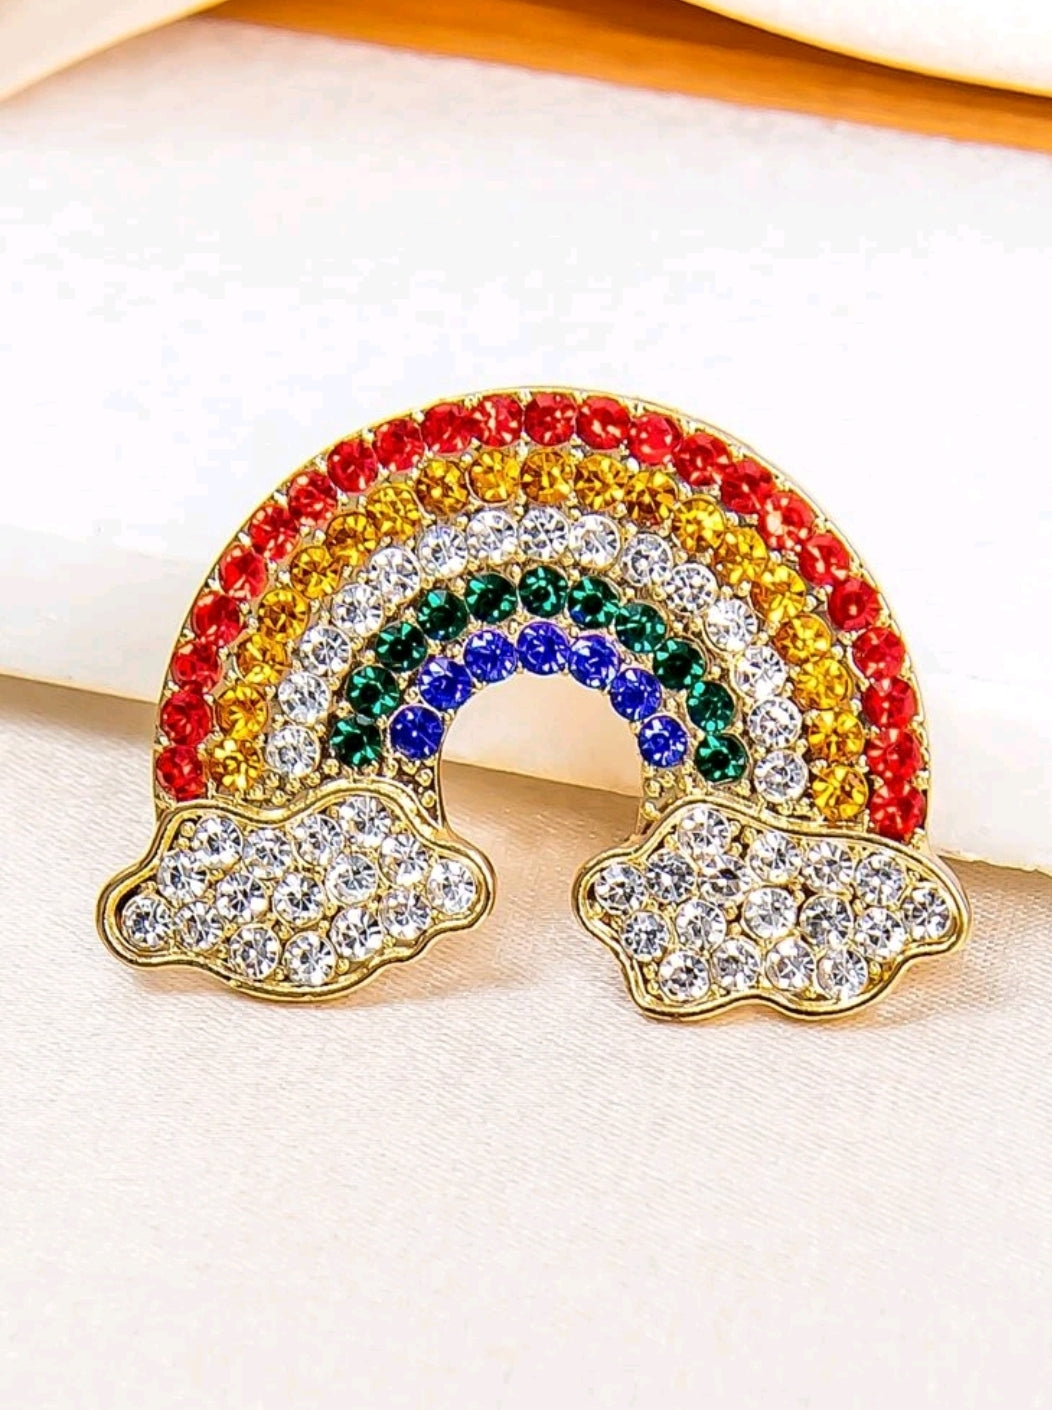 Colourful Rhinestone Rainbow Design Brooch Color: Multicolour Details: Rhinestone Style: Glamorous Cool Fashion Pride Chic Type: Brooches Material: Metal Size: Height 2.4cm/0.9inch Width3.5cm/1.4inch Accessories and gift idea